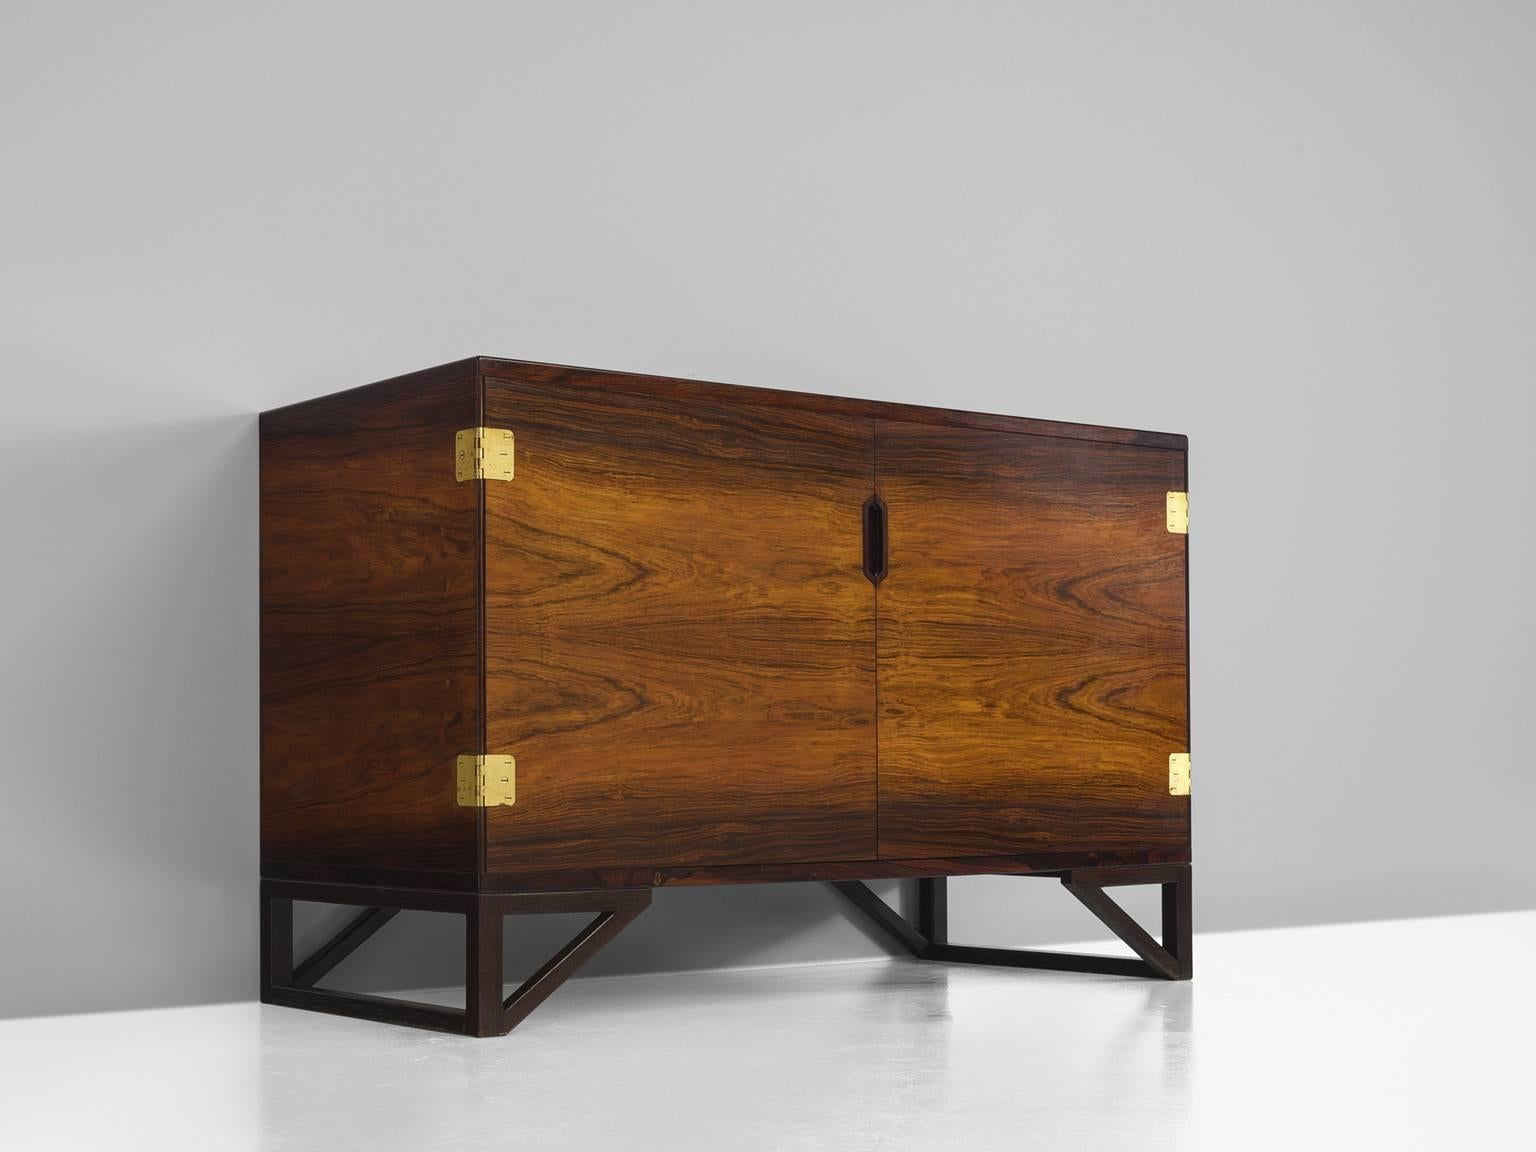 Cabinet, in rosewood and brass, by Svend Langkilde for Illums Bolighus, Denmark, 1950s. 

Modest and refined rosewood cabinet designed by Svend Langkilde, produced by Illums Bolighus. This sideboard is equipped with Langekilde's signature graphic